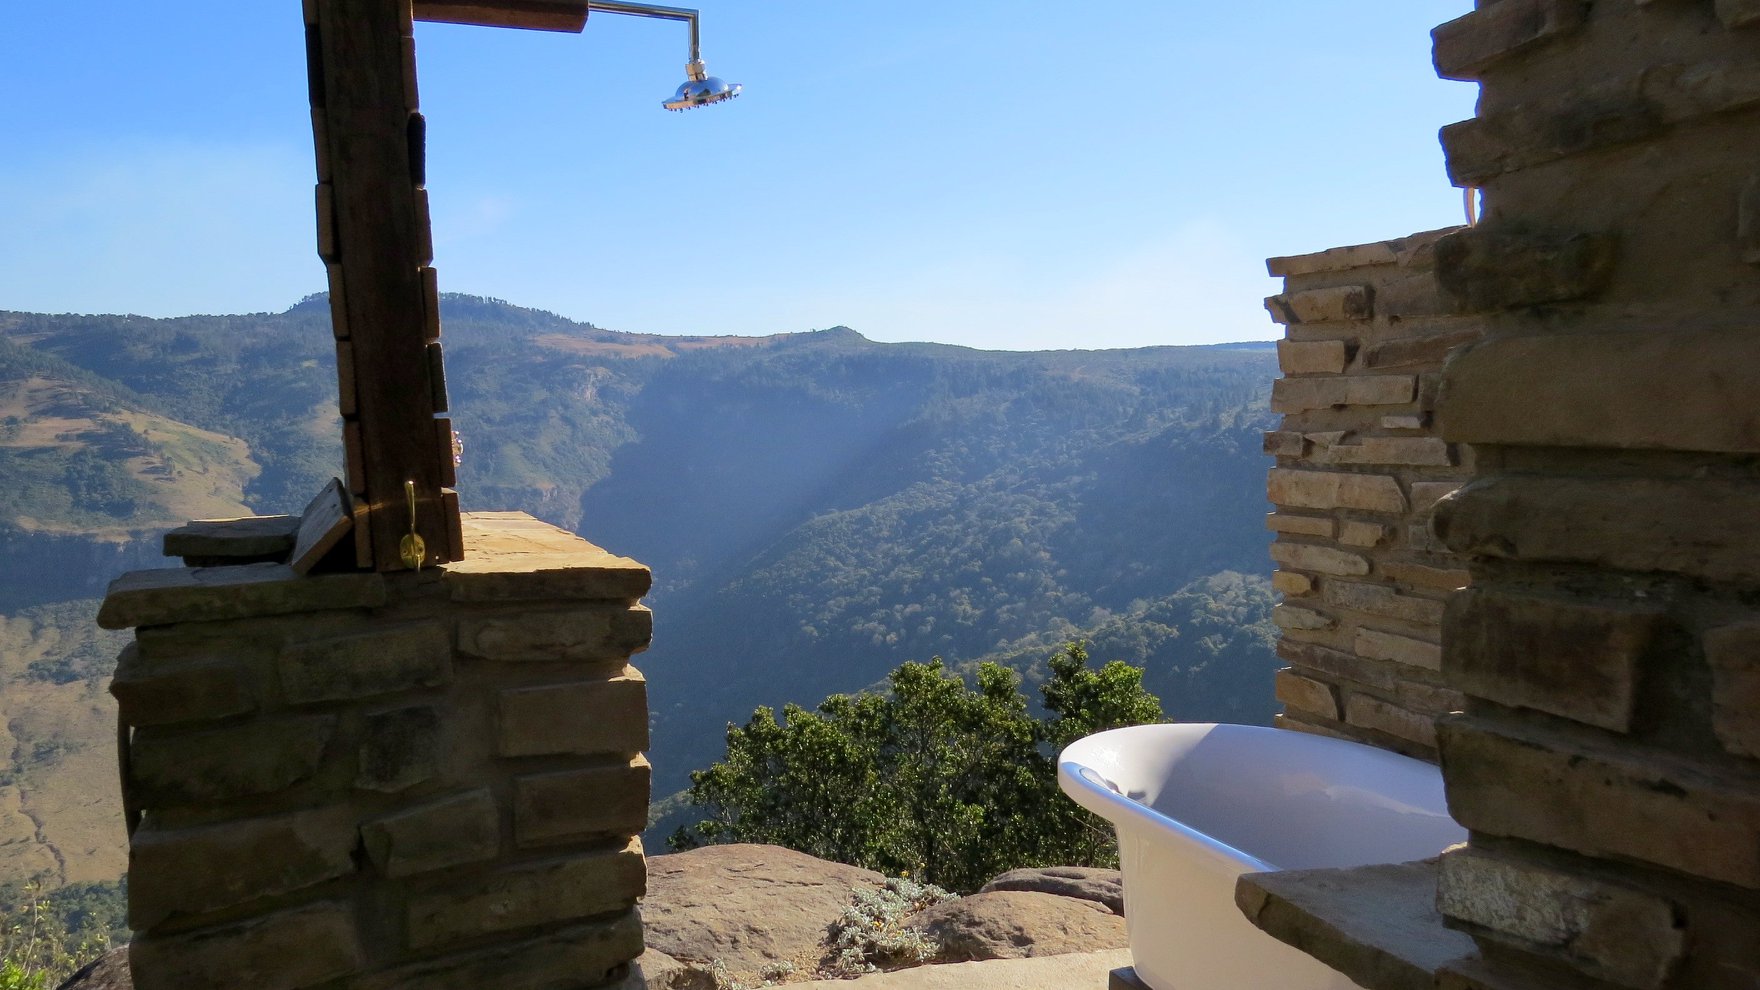 An outdoor bathroom with views of the Hogsback mountains and cliffs